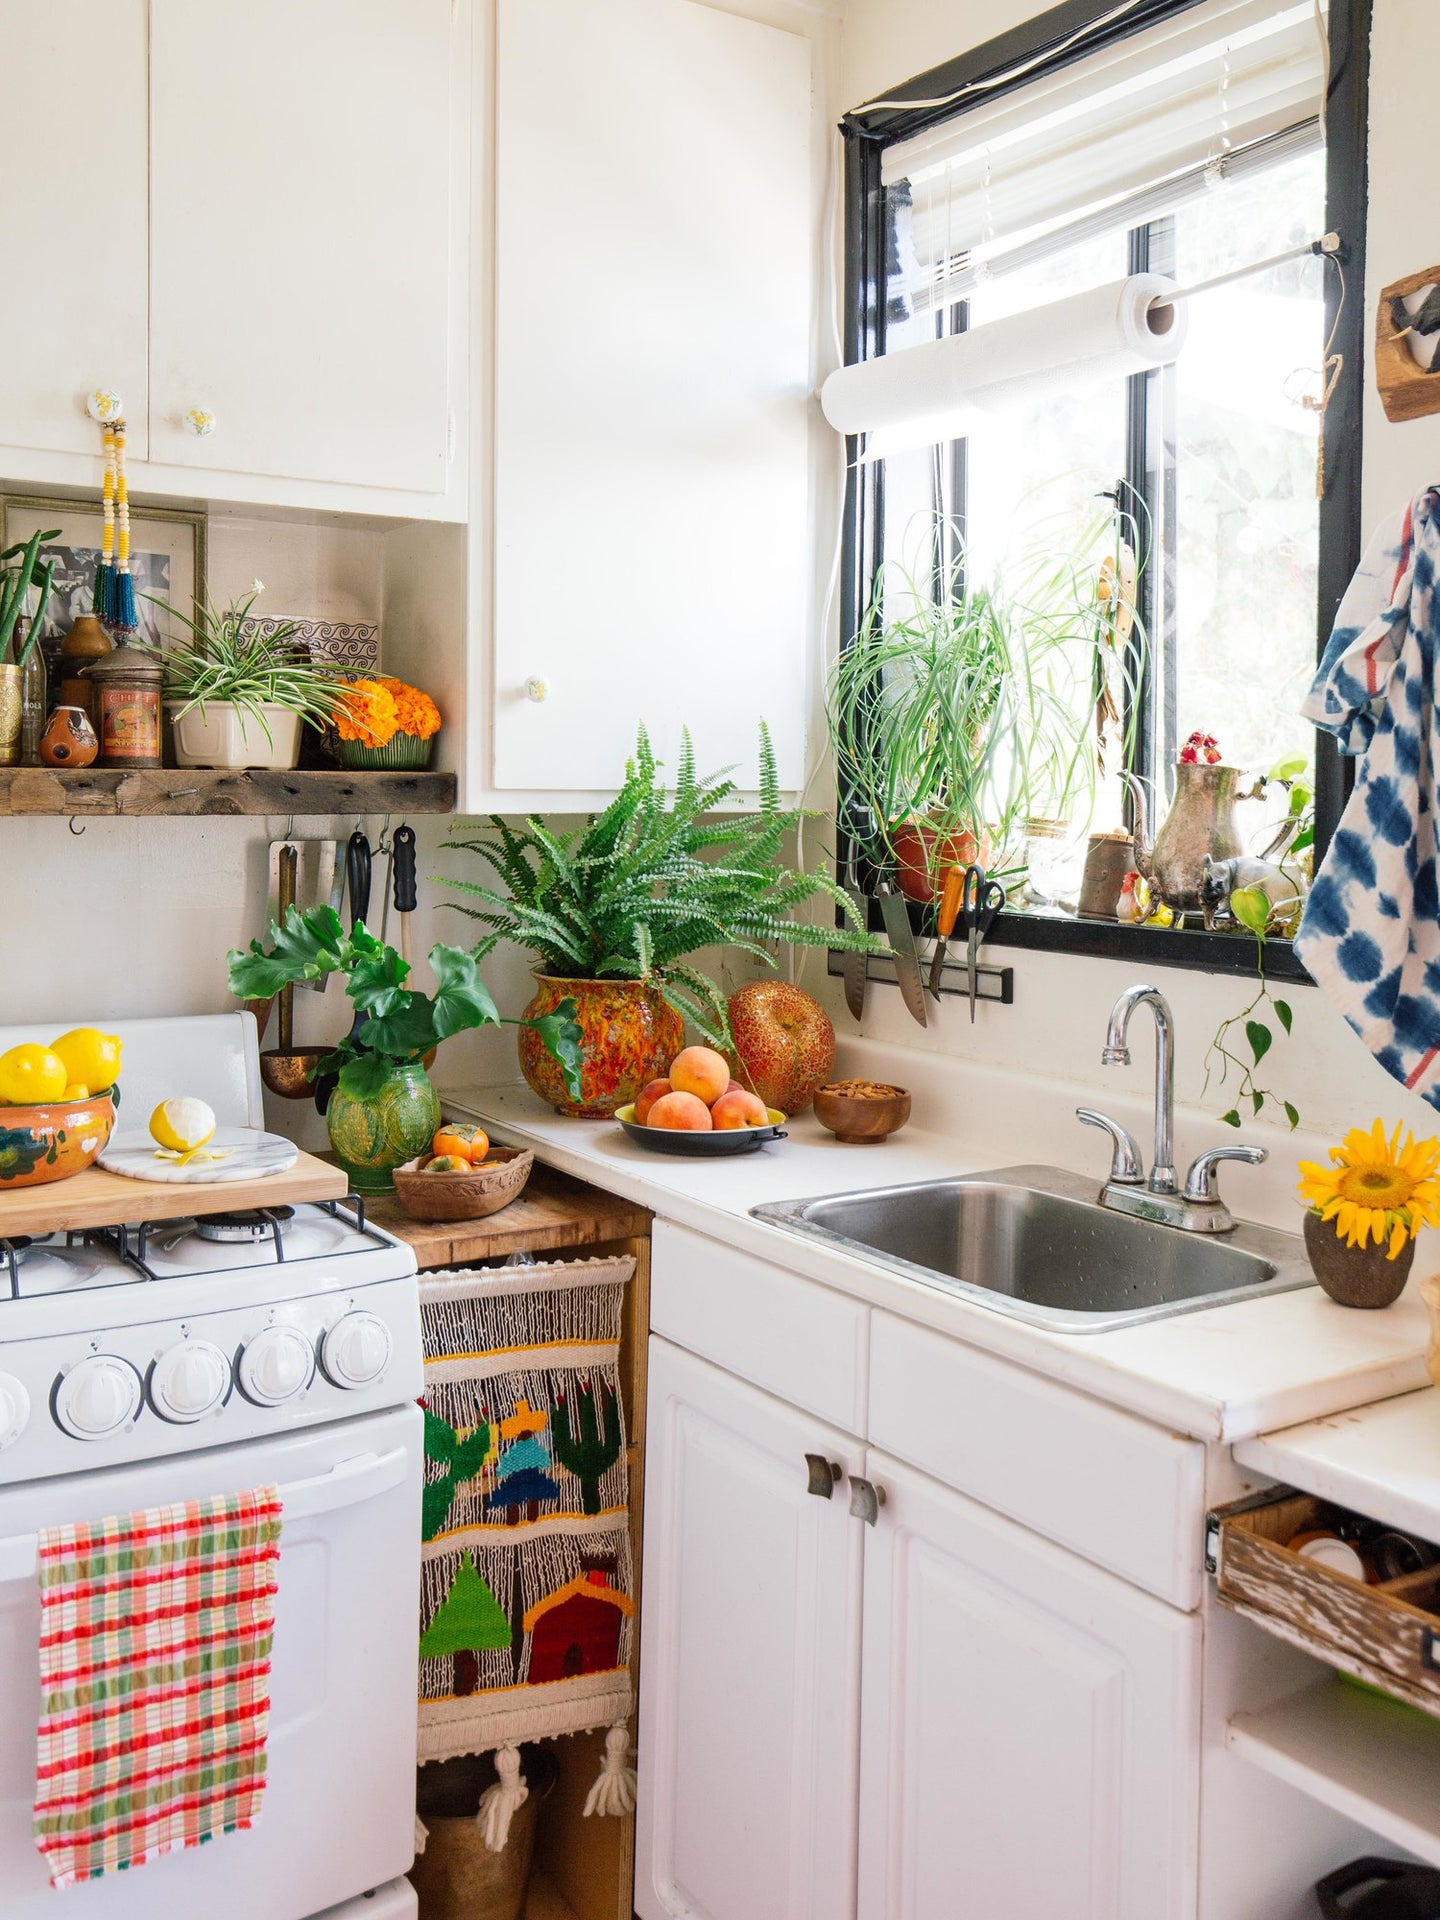 7 Kitchen Design Ideas for Tiny Homes to Maximize Space